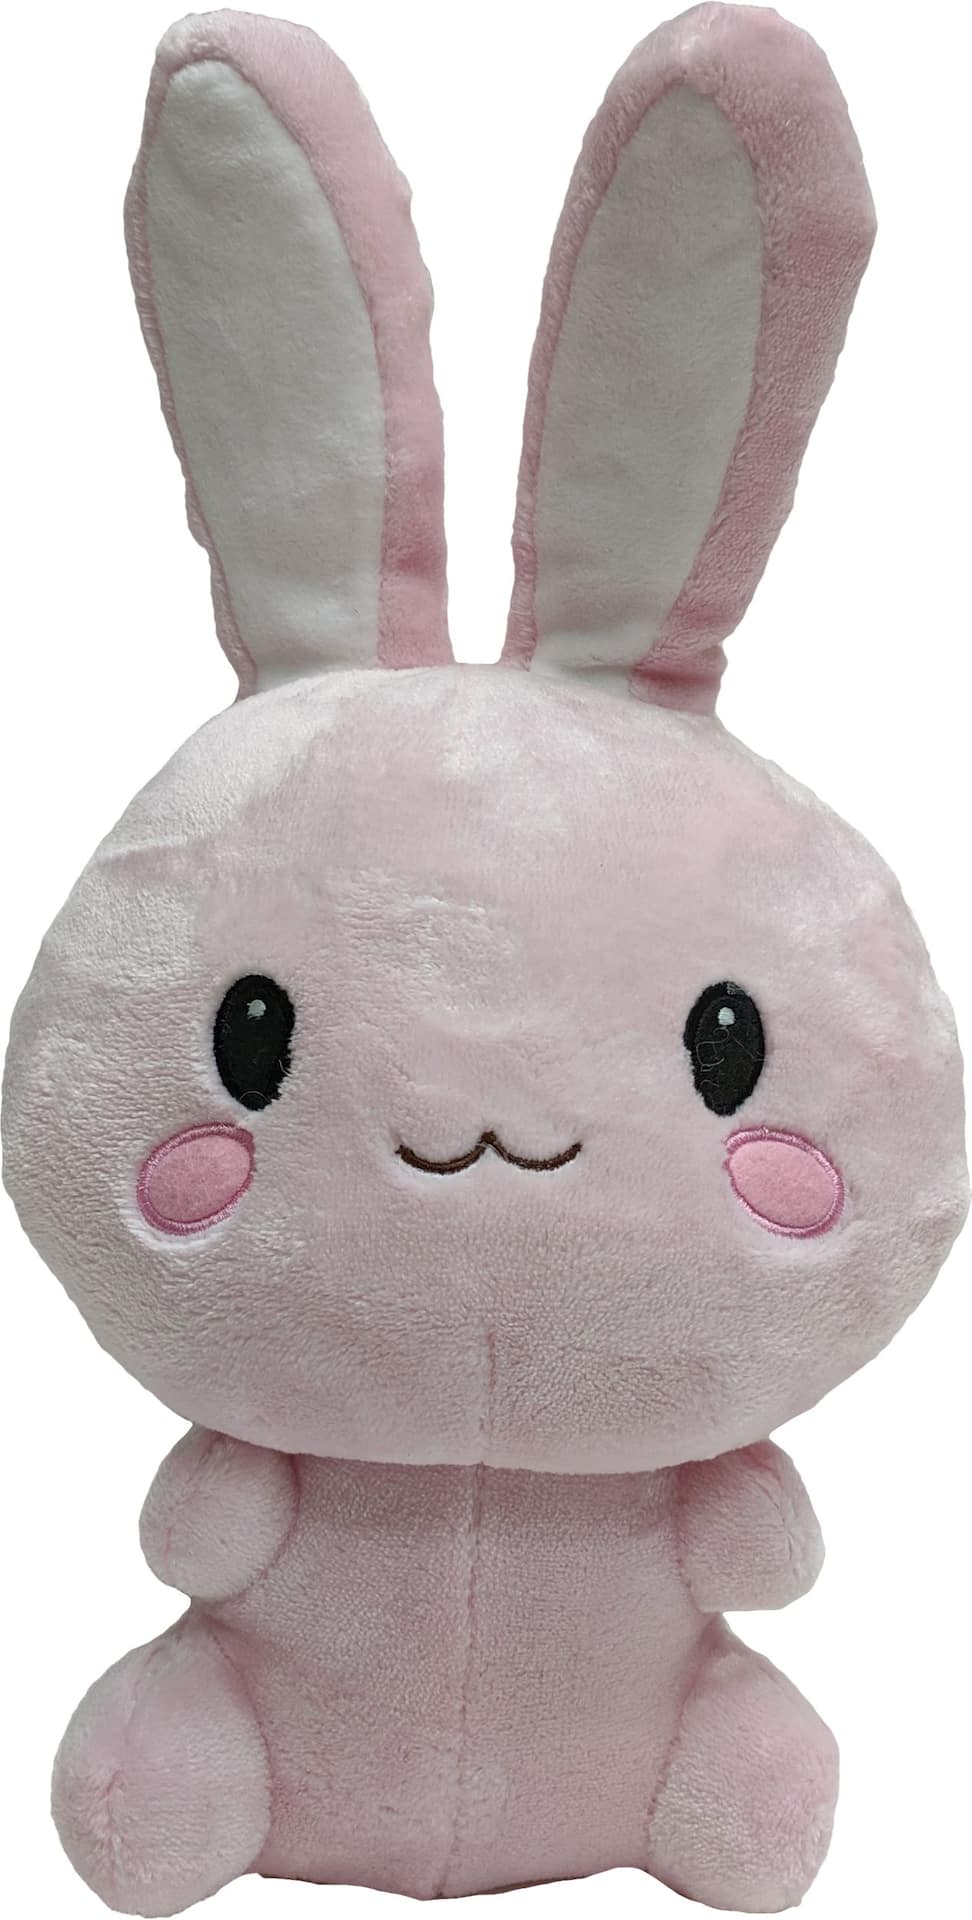 Amscan Kawaii Pink Bunny Plush, 8-in x 14-in, Ages 5+